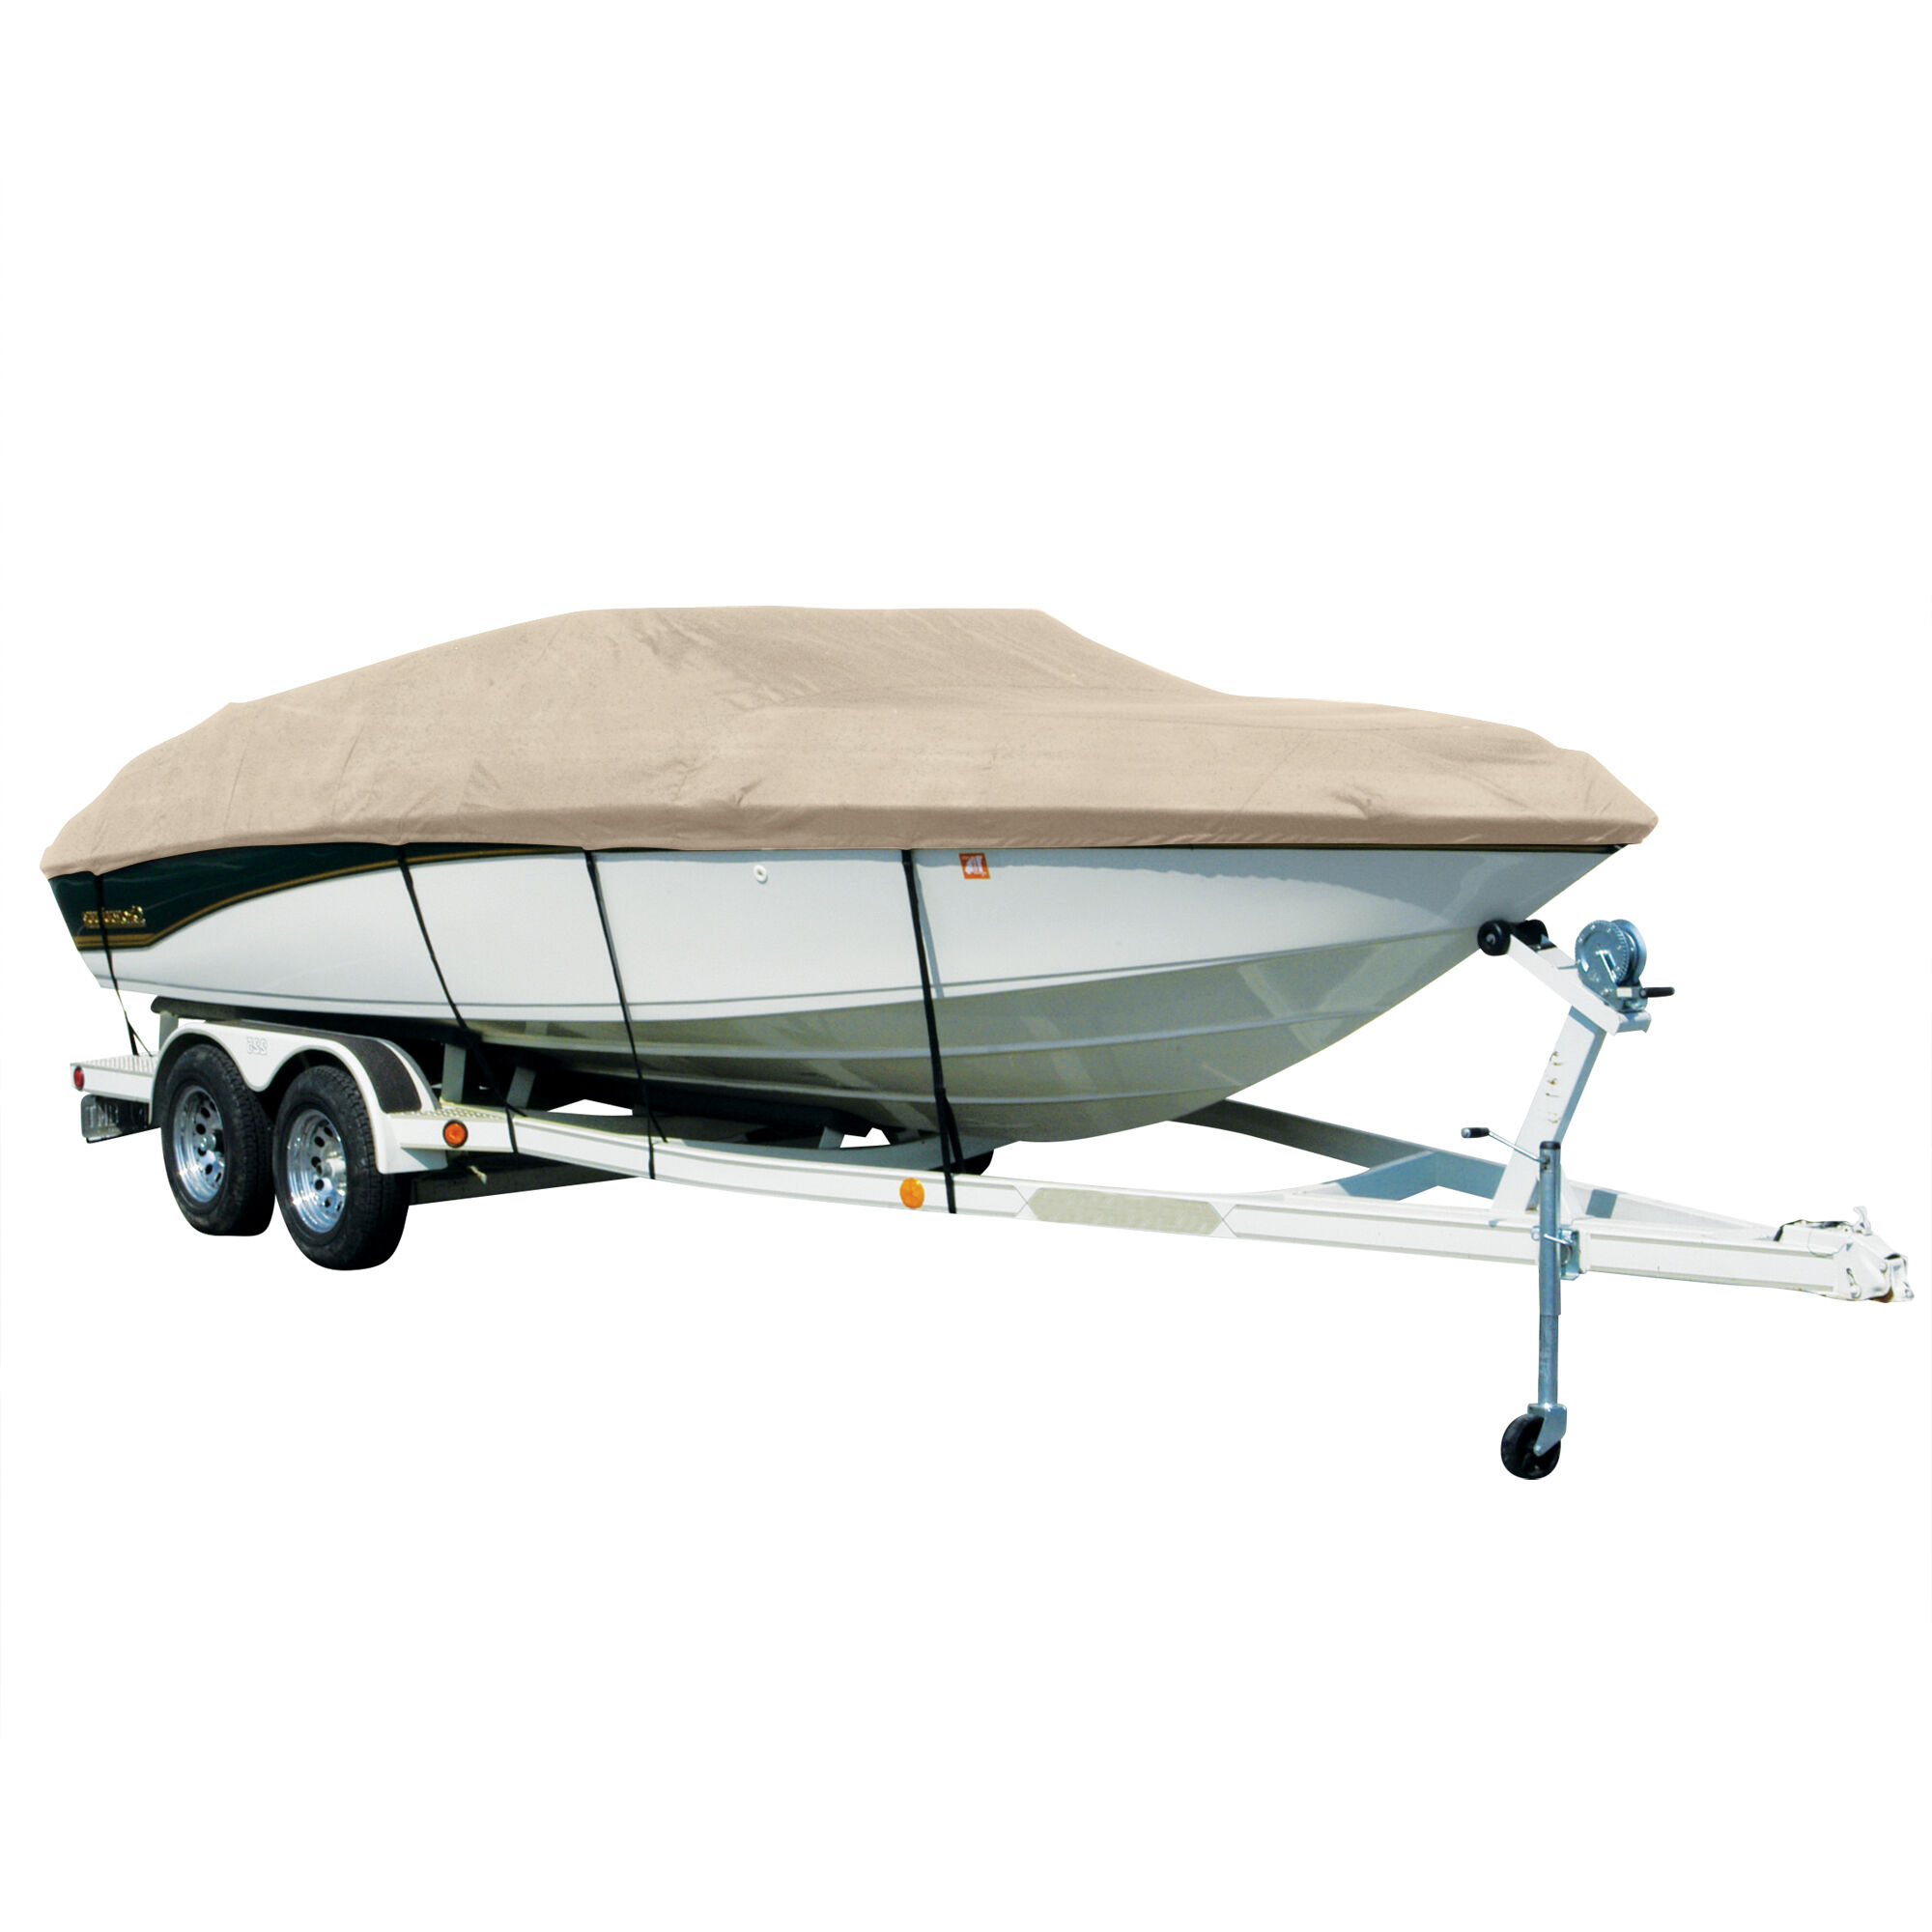 Covermate Exact Fit Sharkskin Boat Cover For Supreme 19 Cs Does Not Cover PLATFORMm in Linen